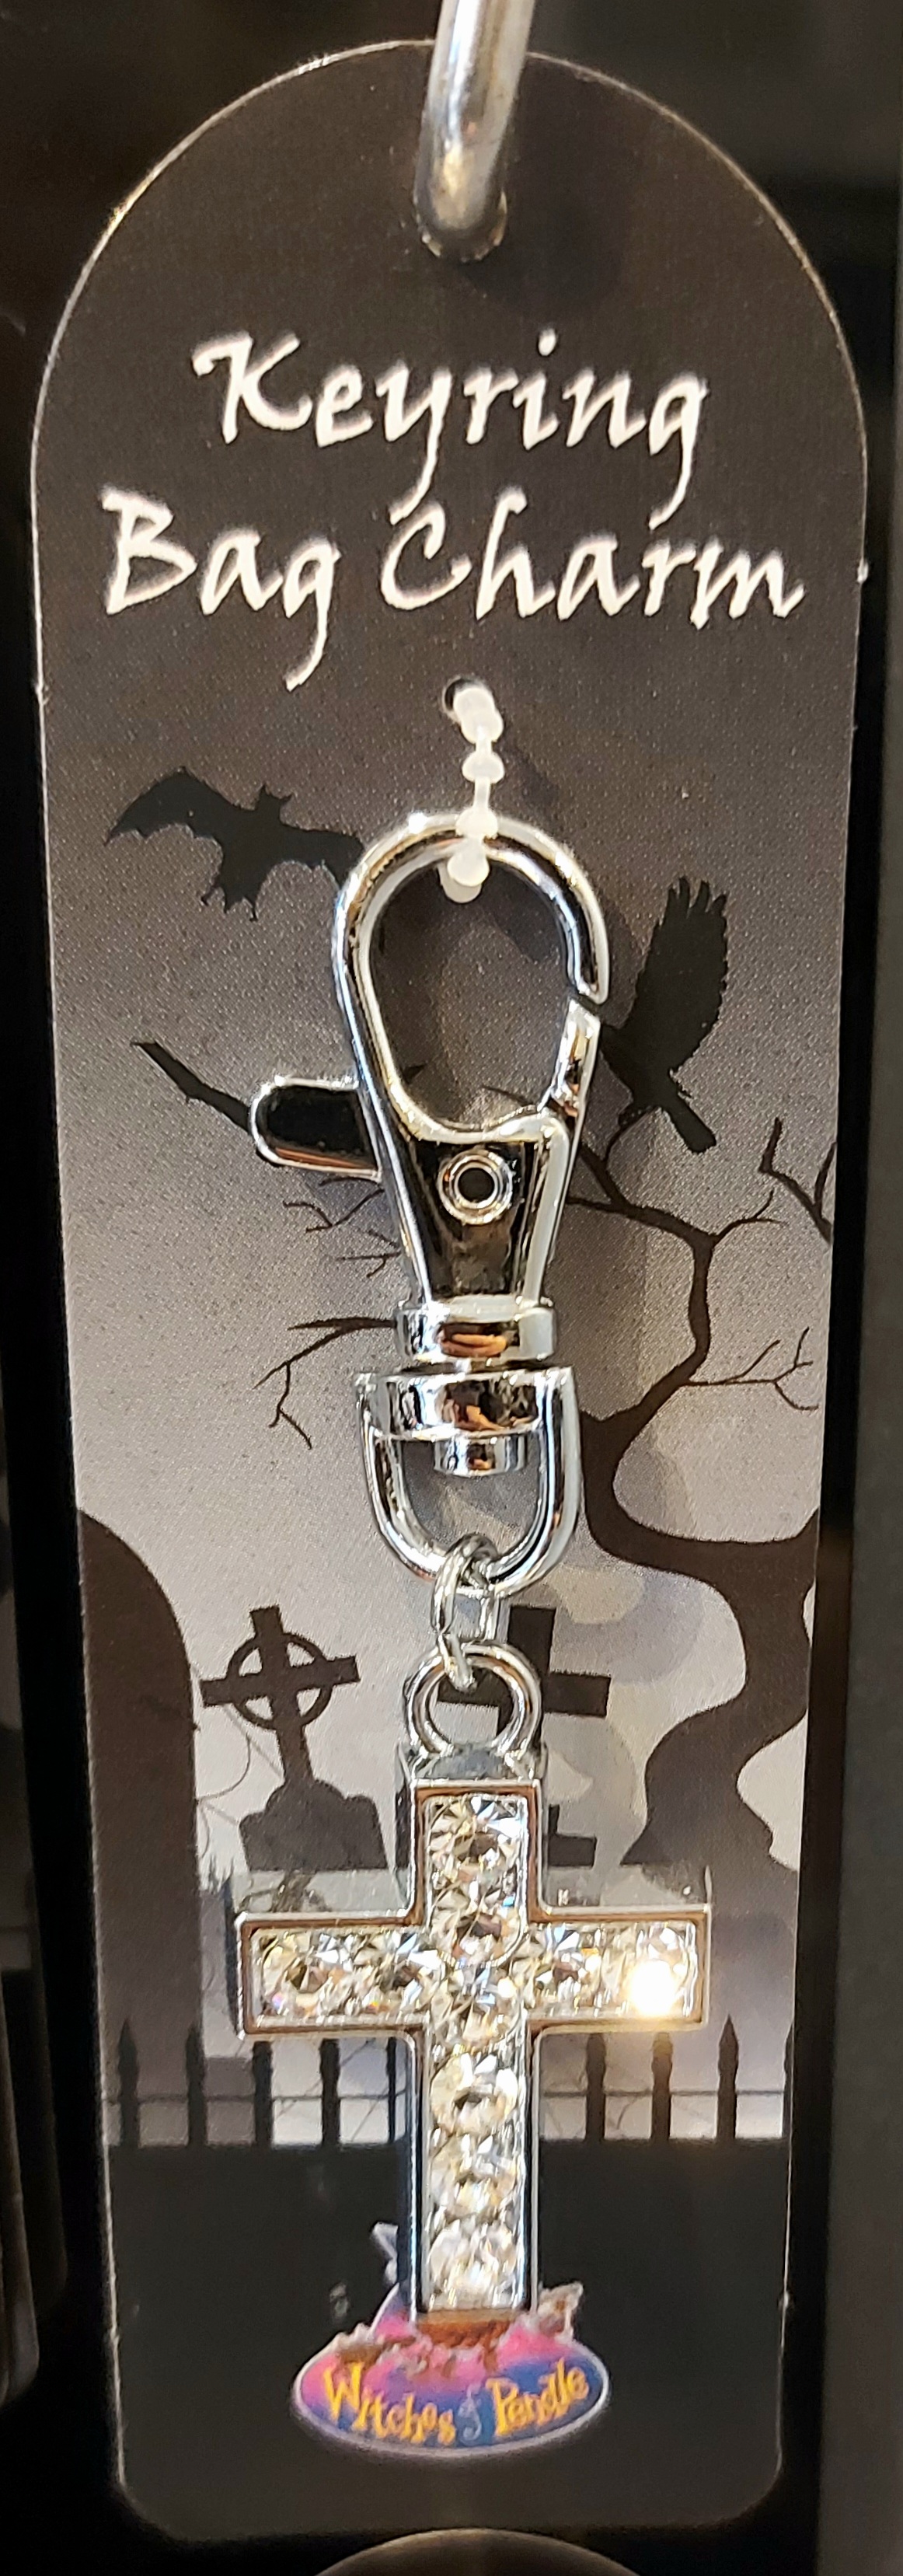 Witches of pendle diamante bag charm/keyring cross